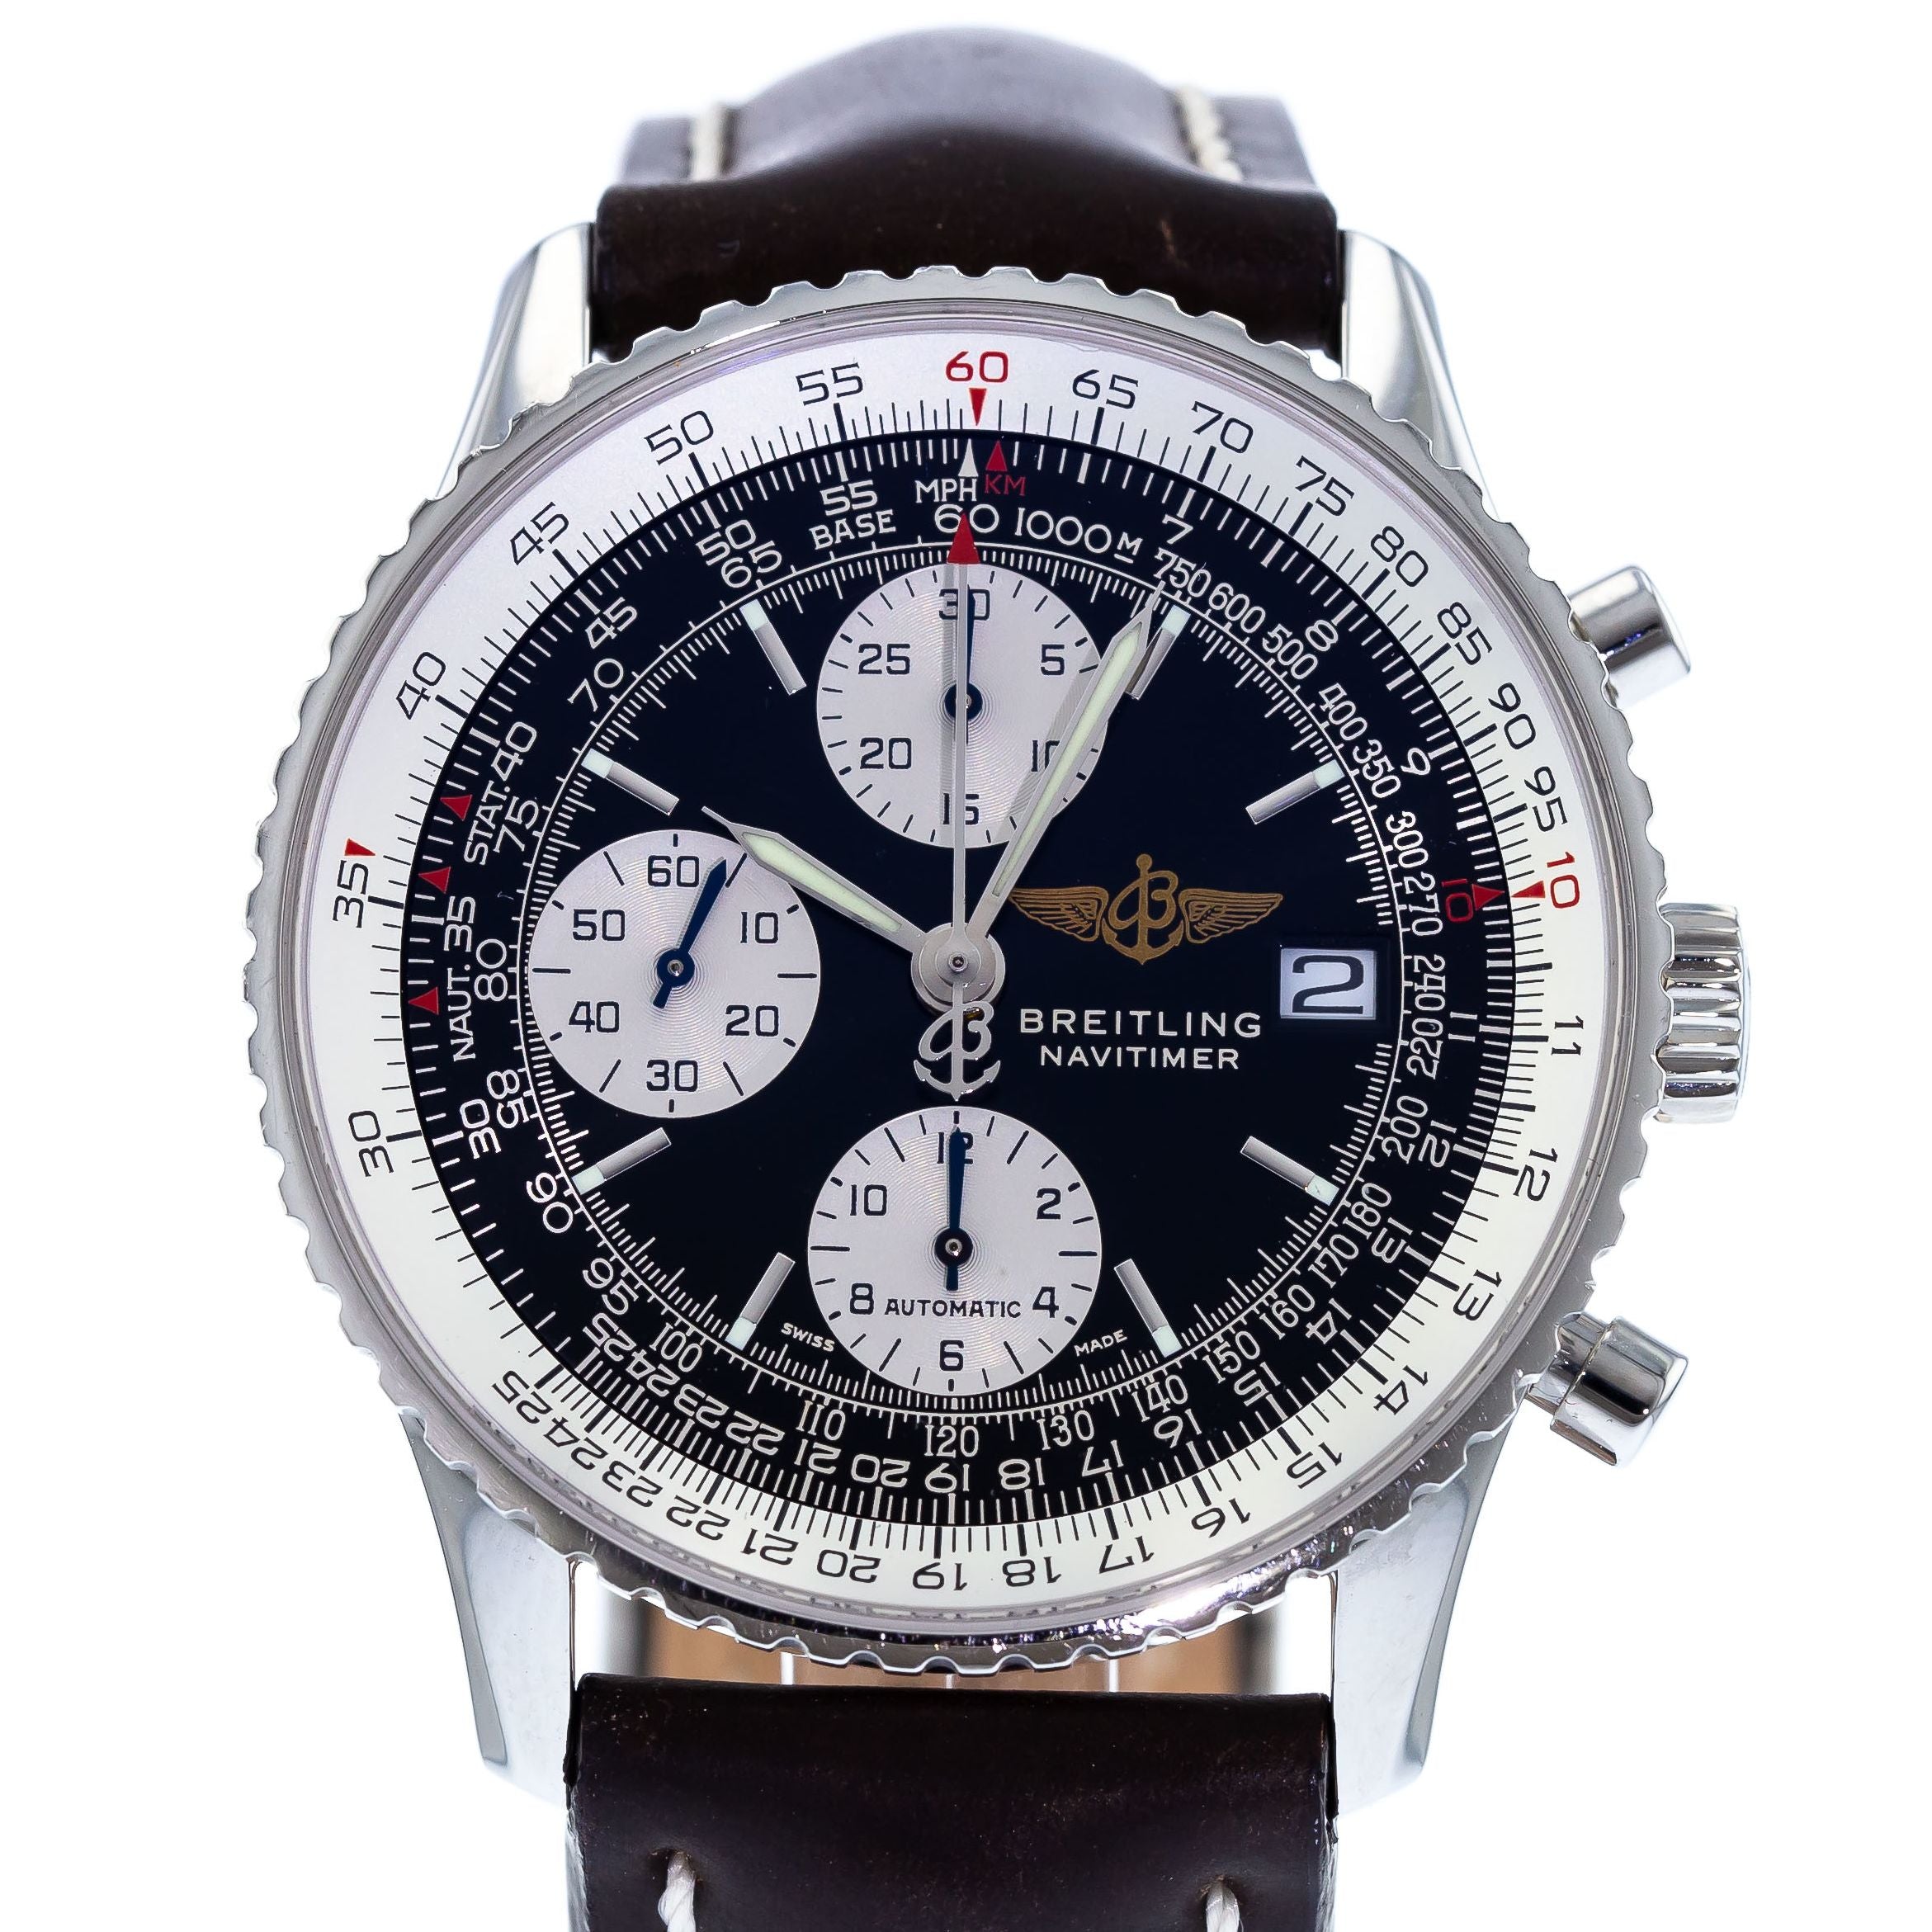 Authentic Used Breitling Old Navitimer II A13322 Watch (10-10-BRT-QNKPD7)